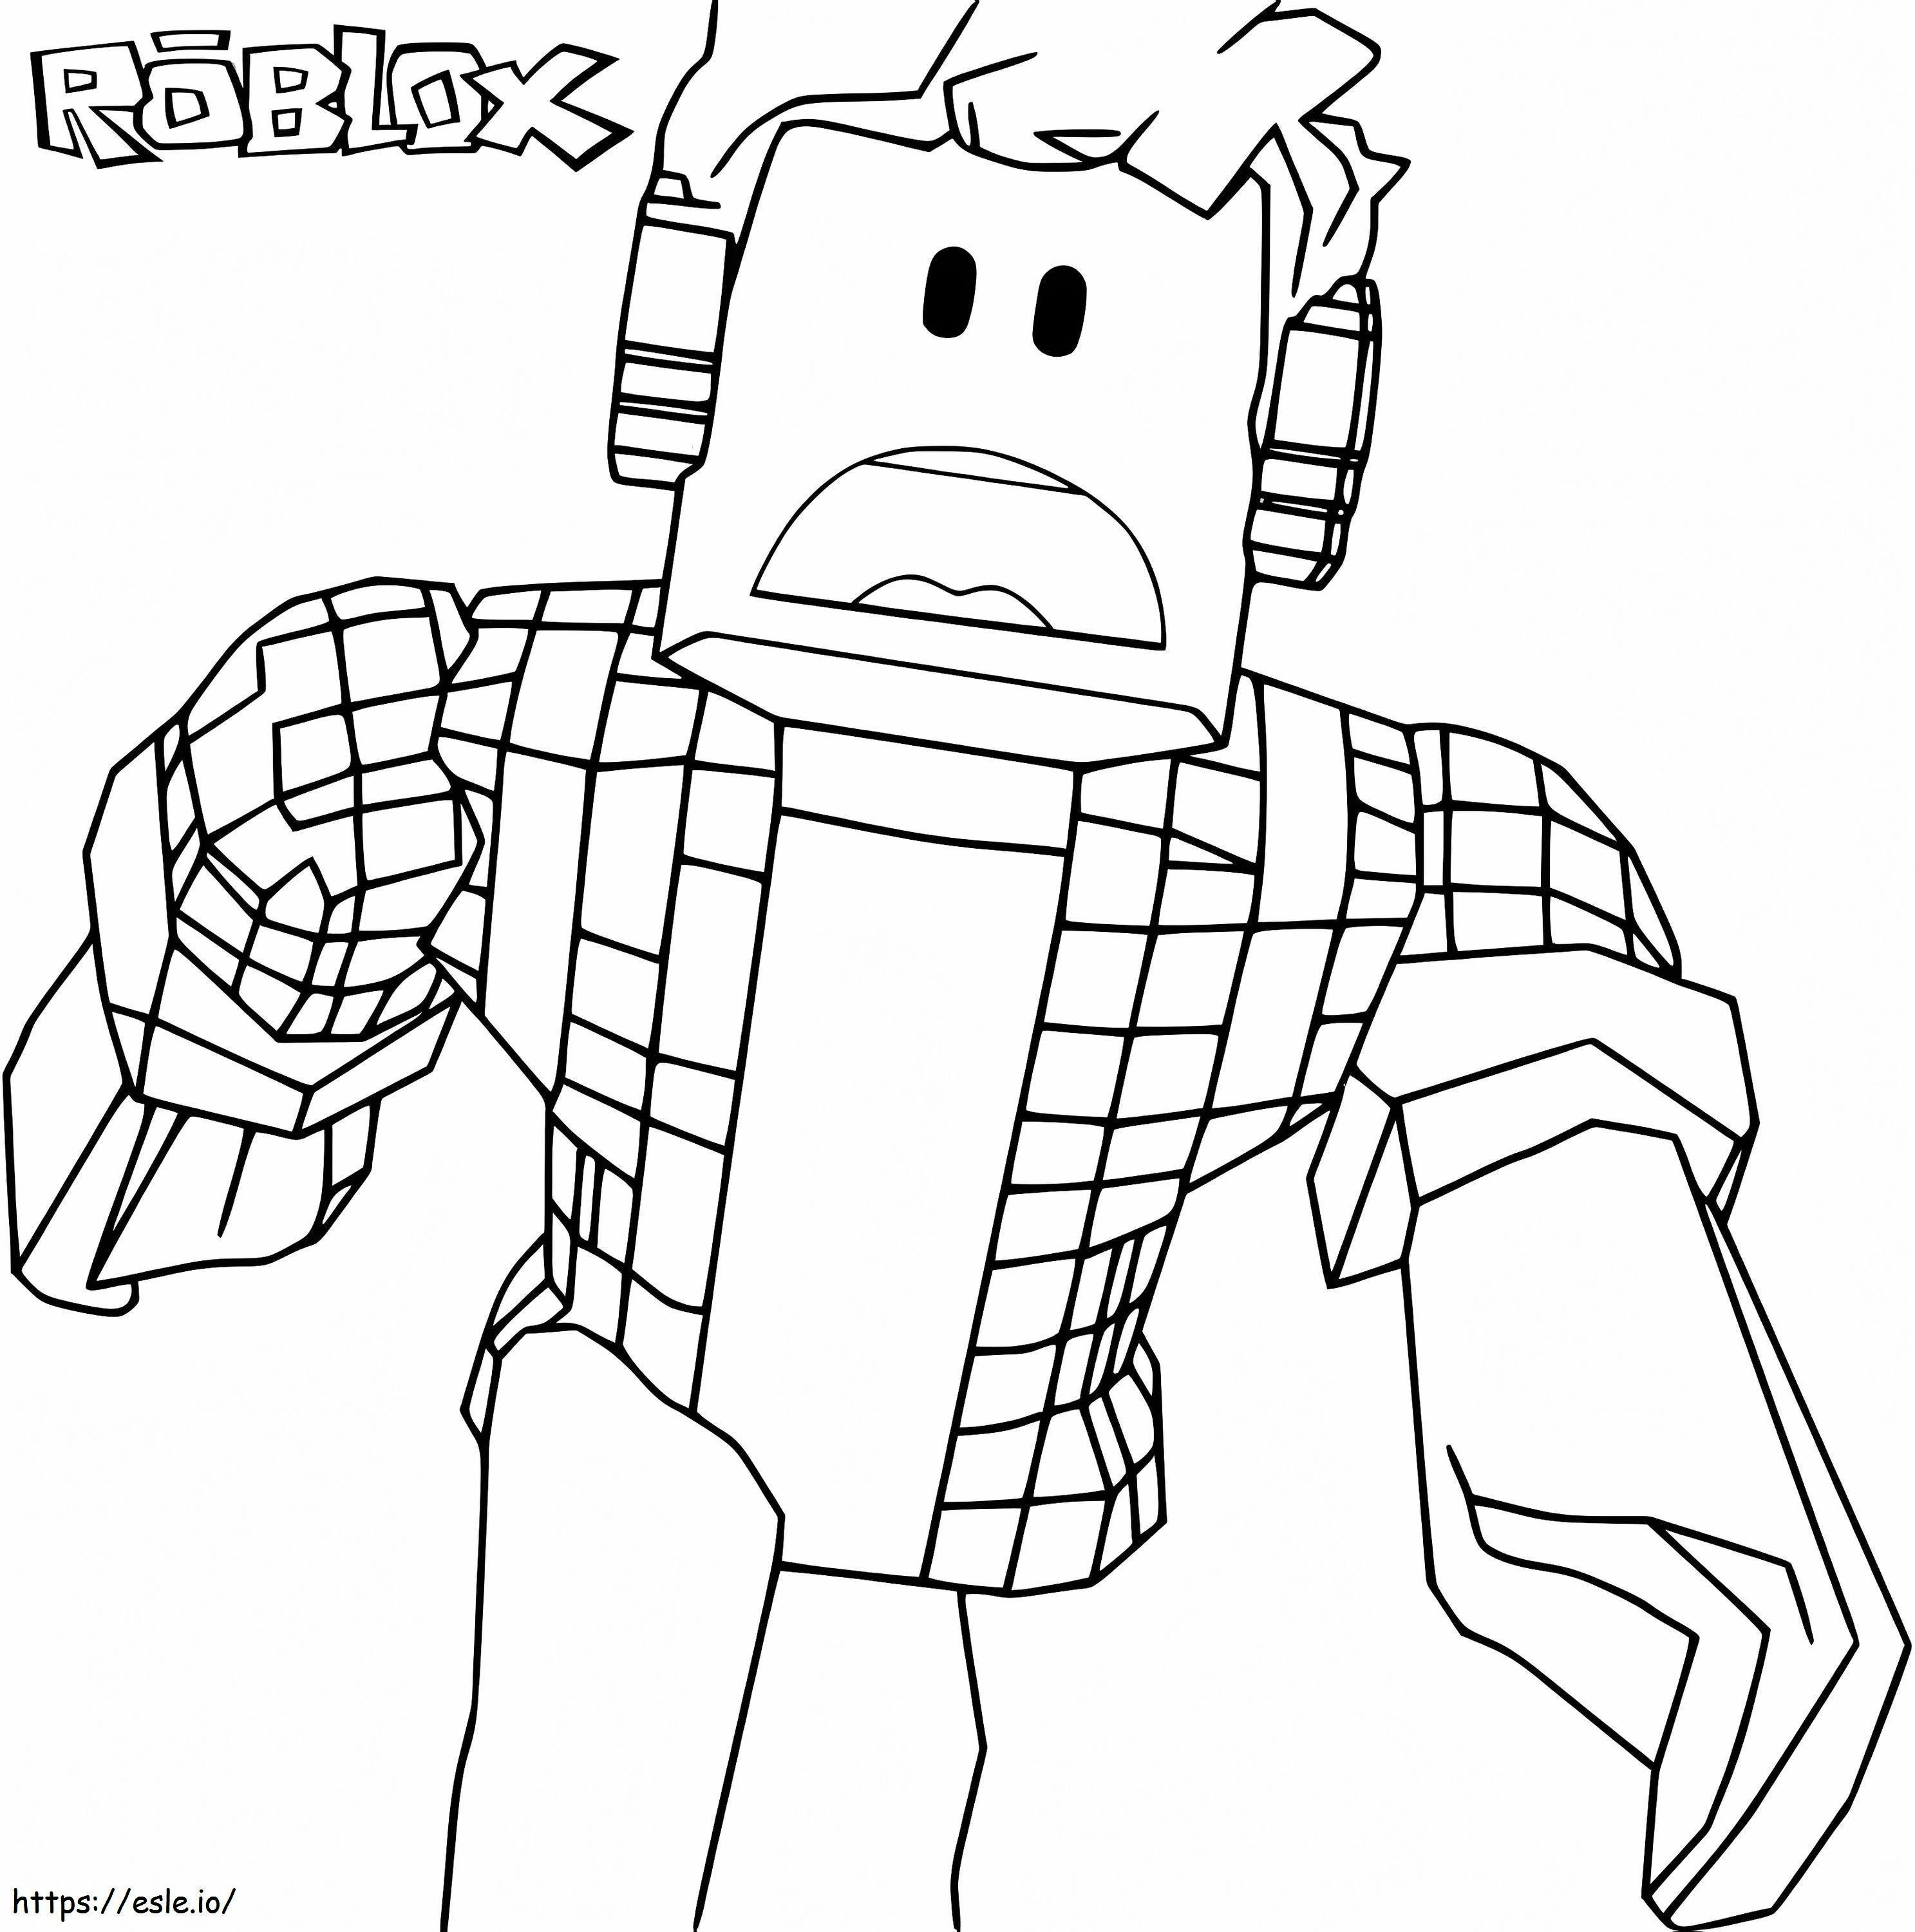 Roblox For Kid coloring page